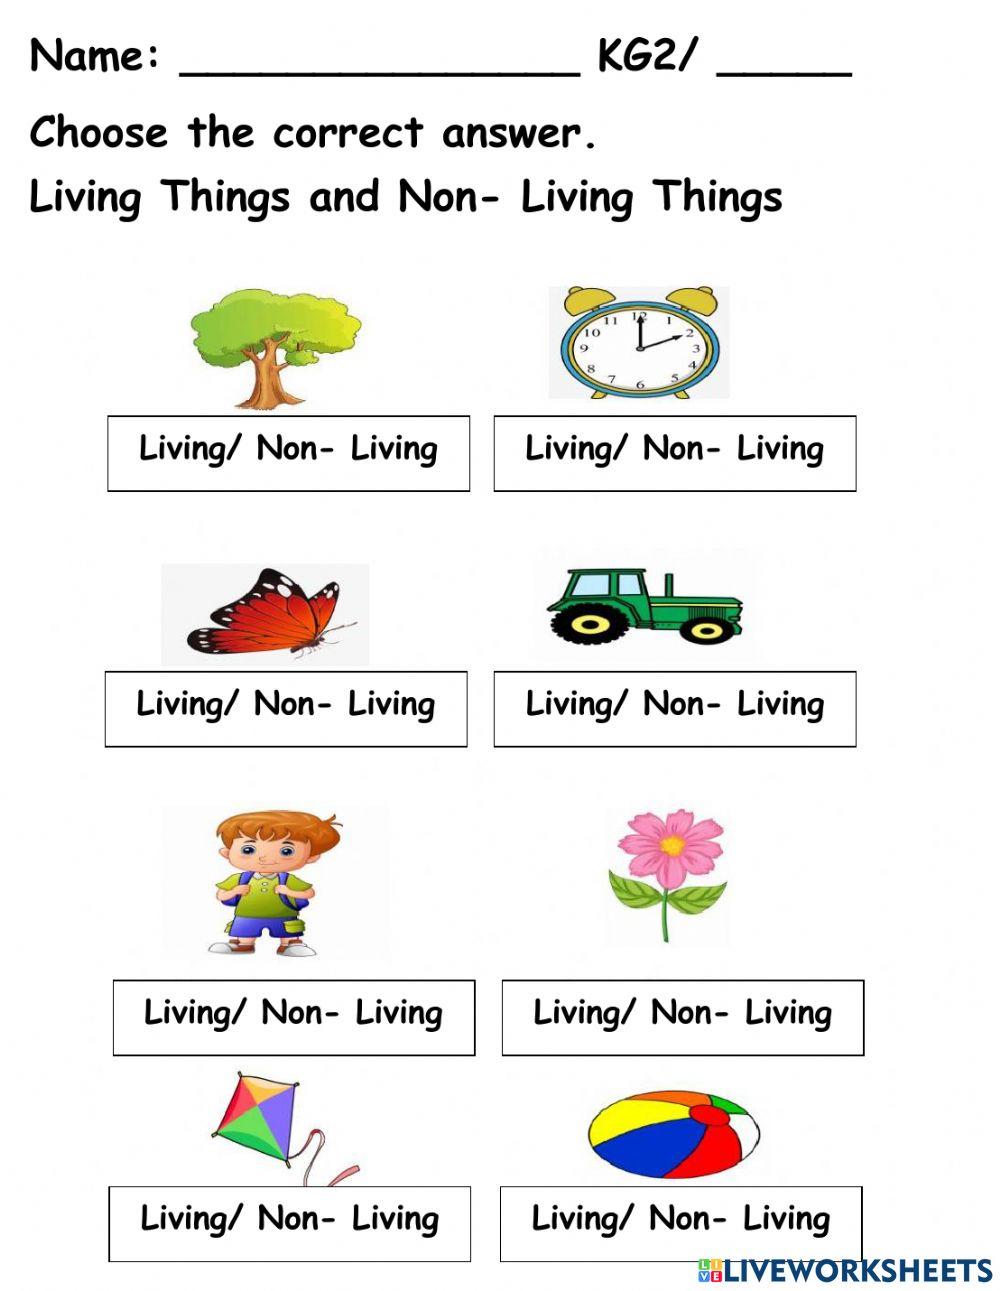 Living and Non Living Things